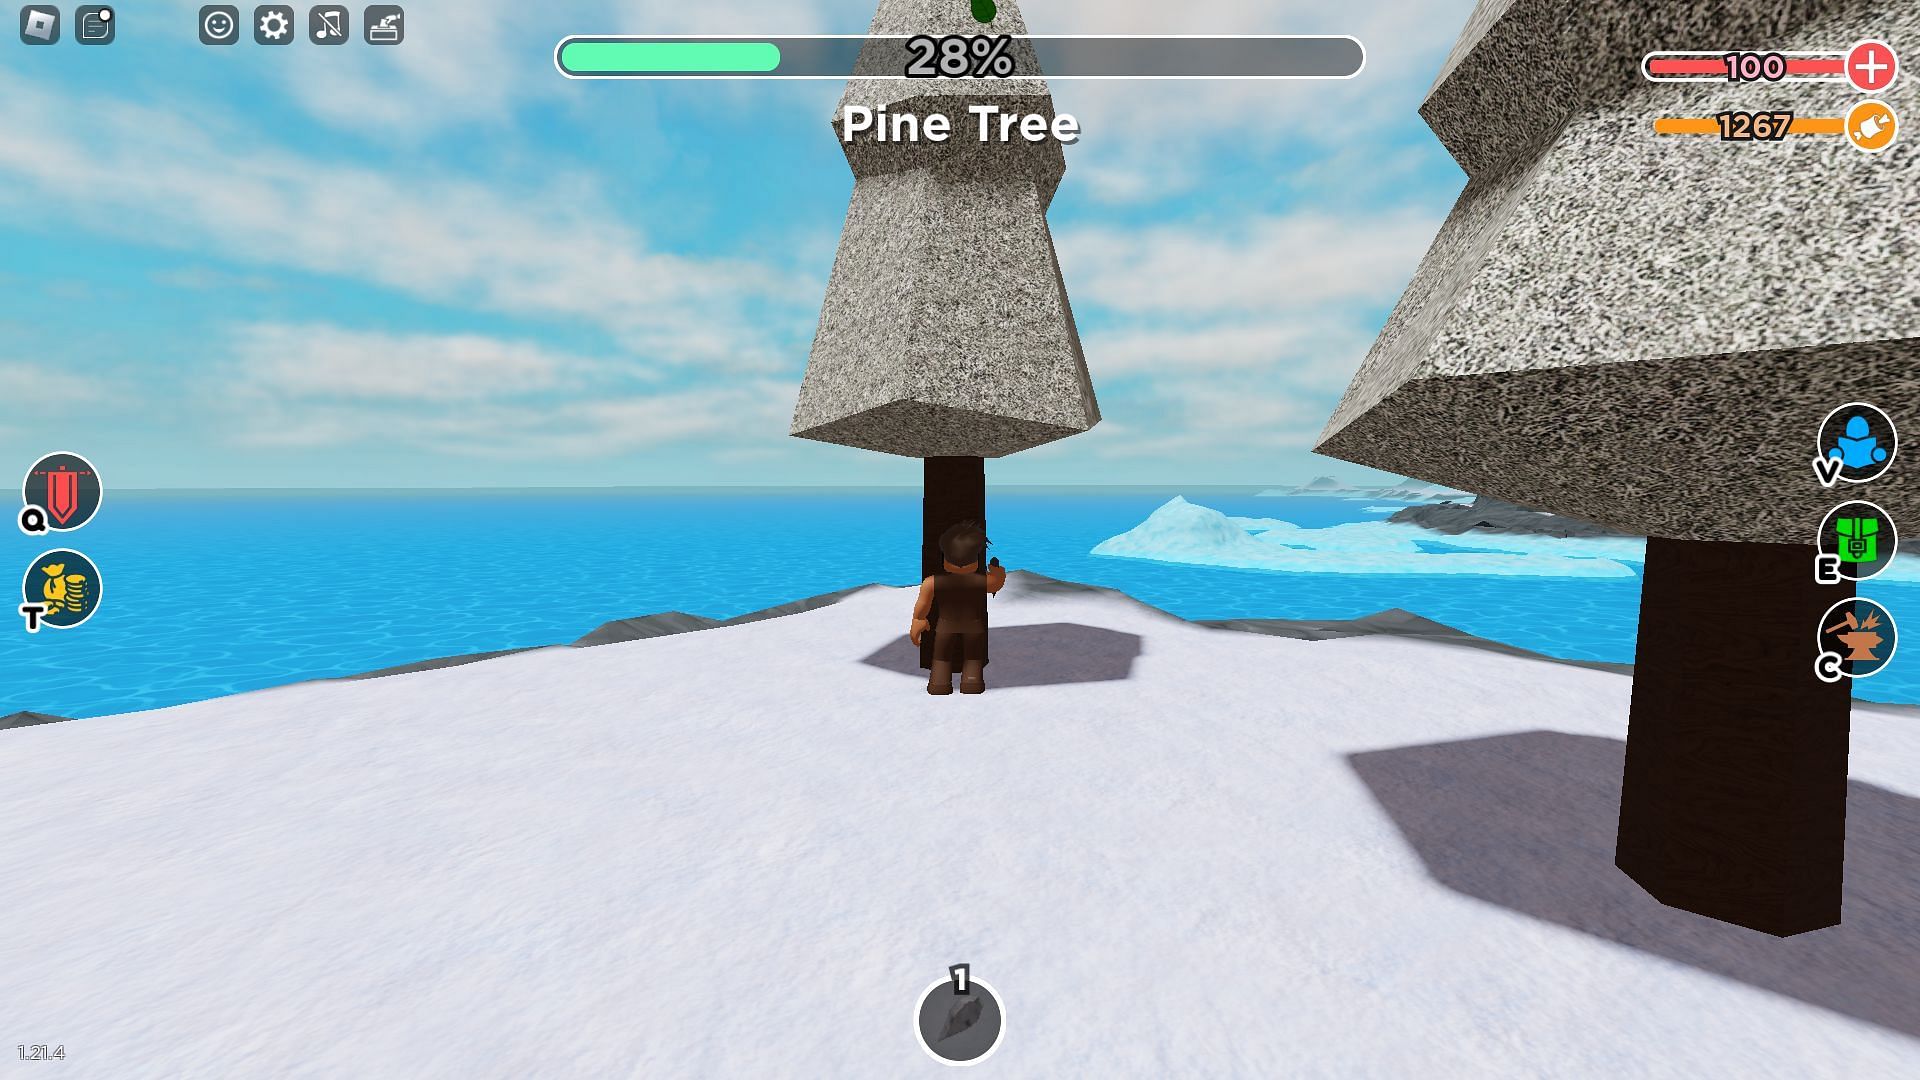 Gathering resources using a sharp stone (Image via Roblox)